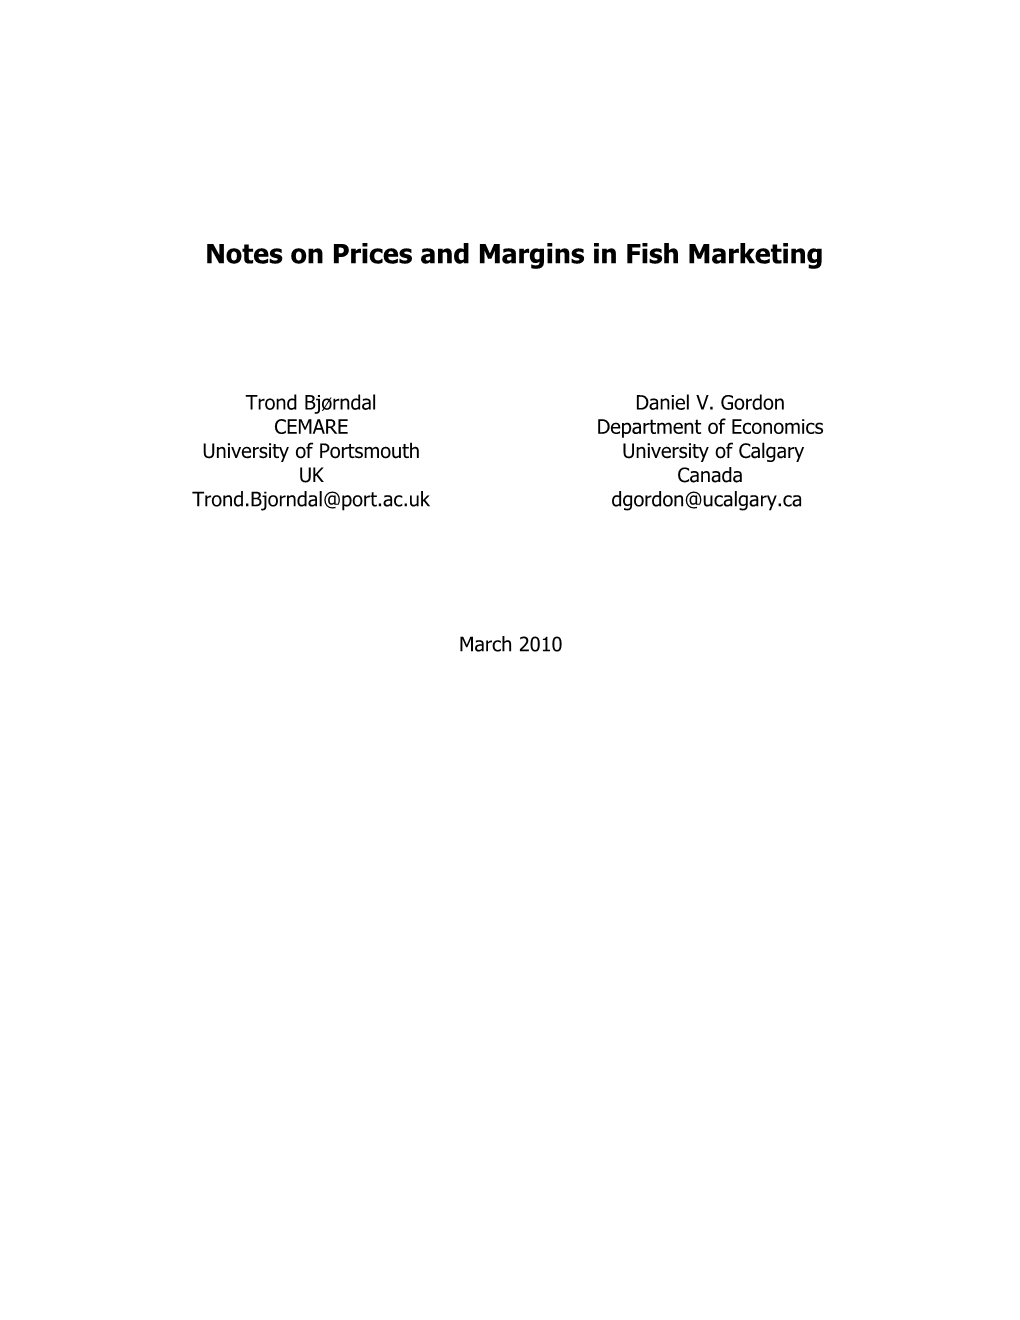 Notes on Prices and Margins in Fish Marketing